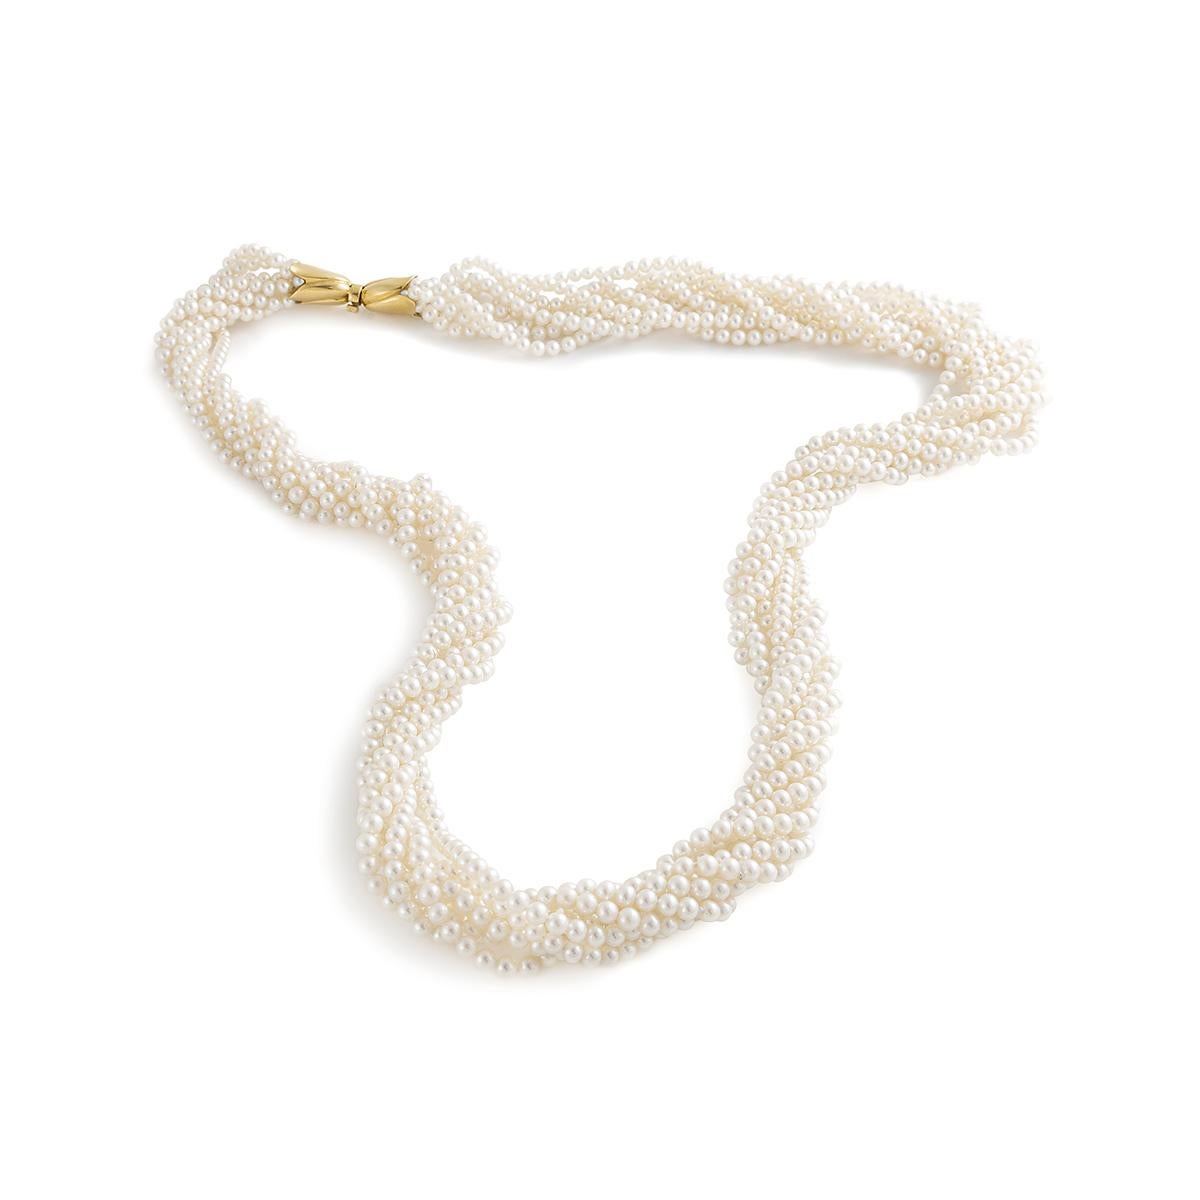 Cultured Pearl yellow gold 18k clasp Sautoir Necklace. Crafted in the 1980s, this piece exudes vintage charm and sophistication.

The necklace showcases lustrous cultured pearls that have been carefully selected for their exceptional quality and